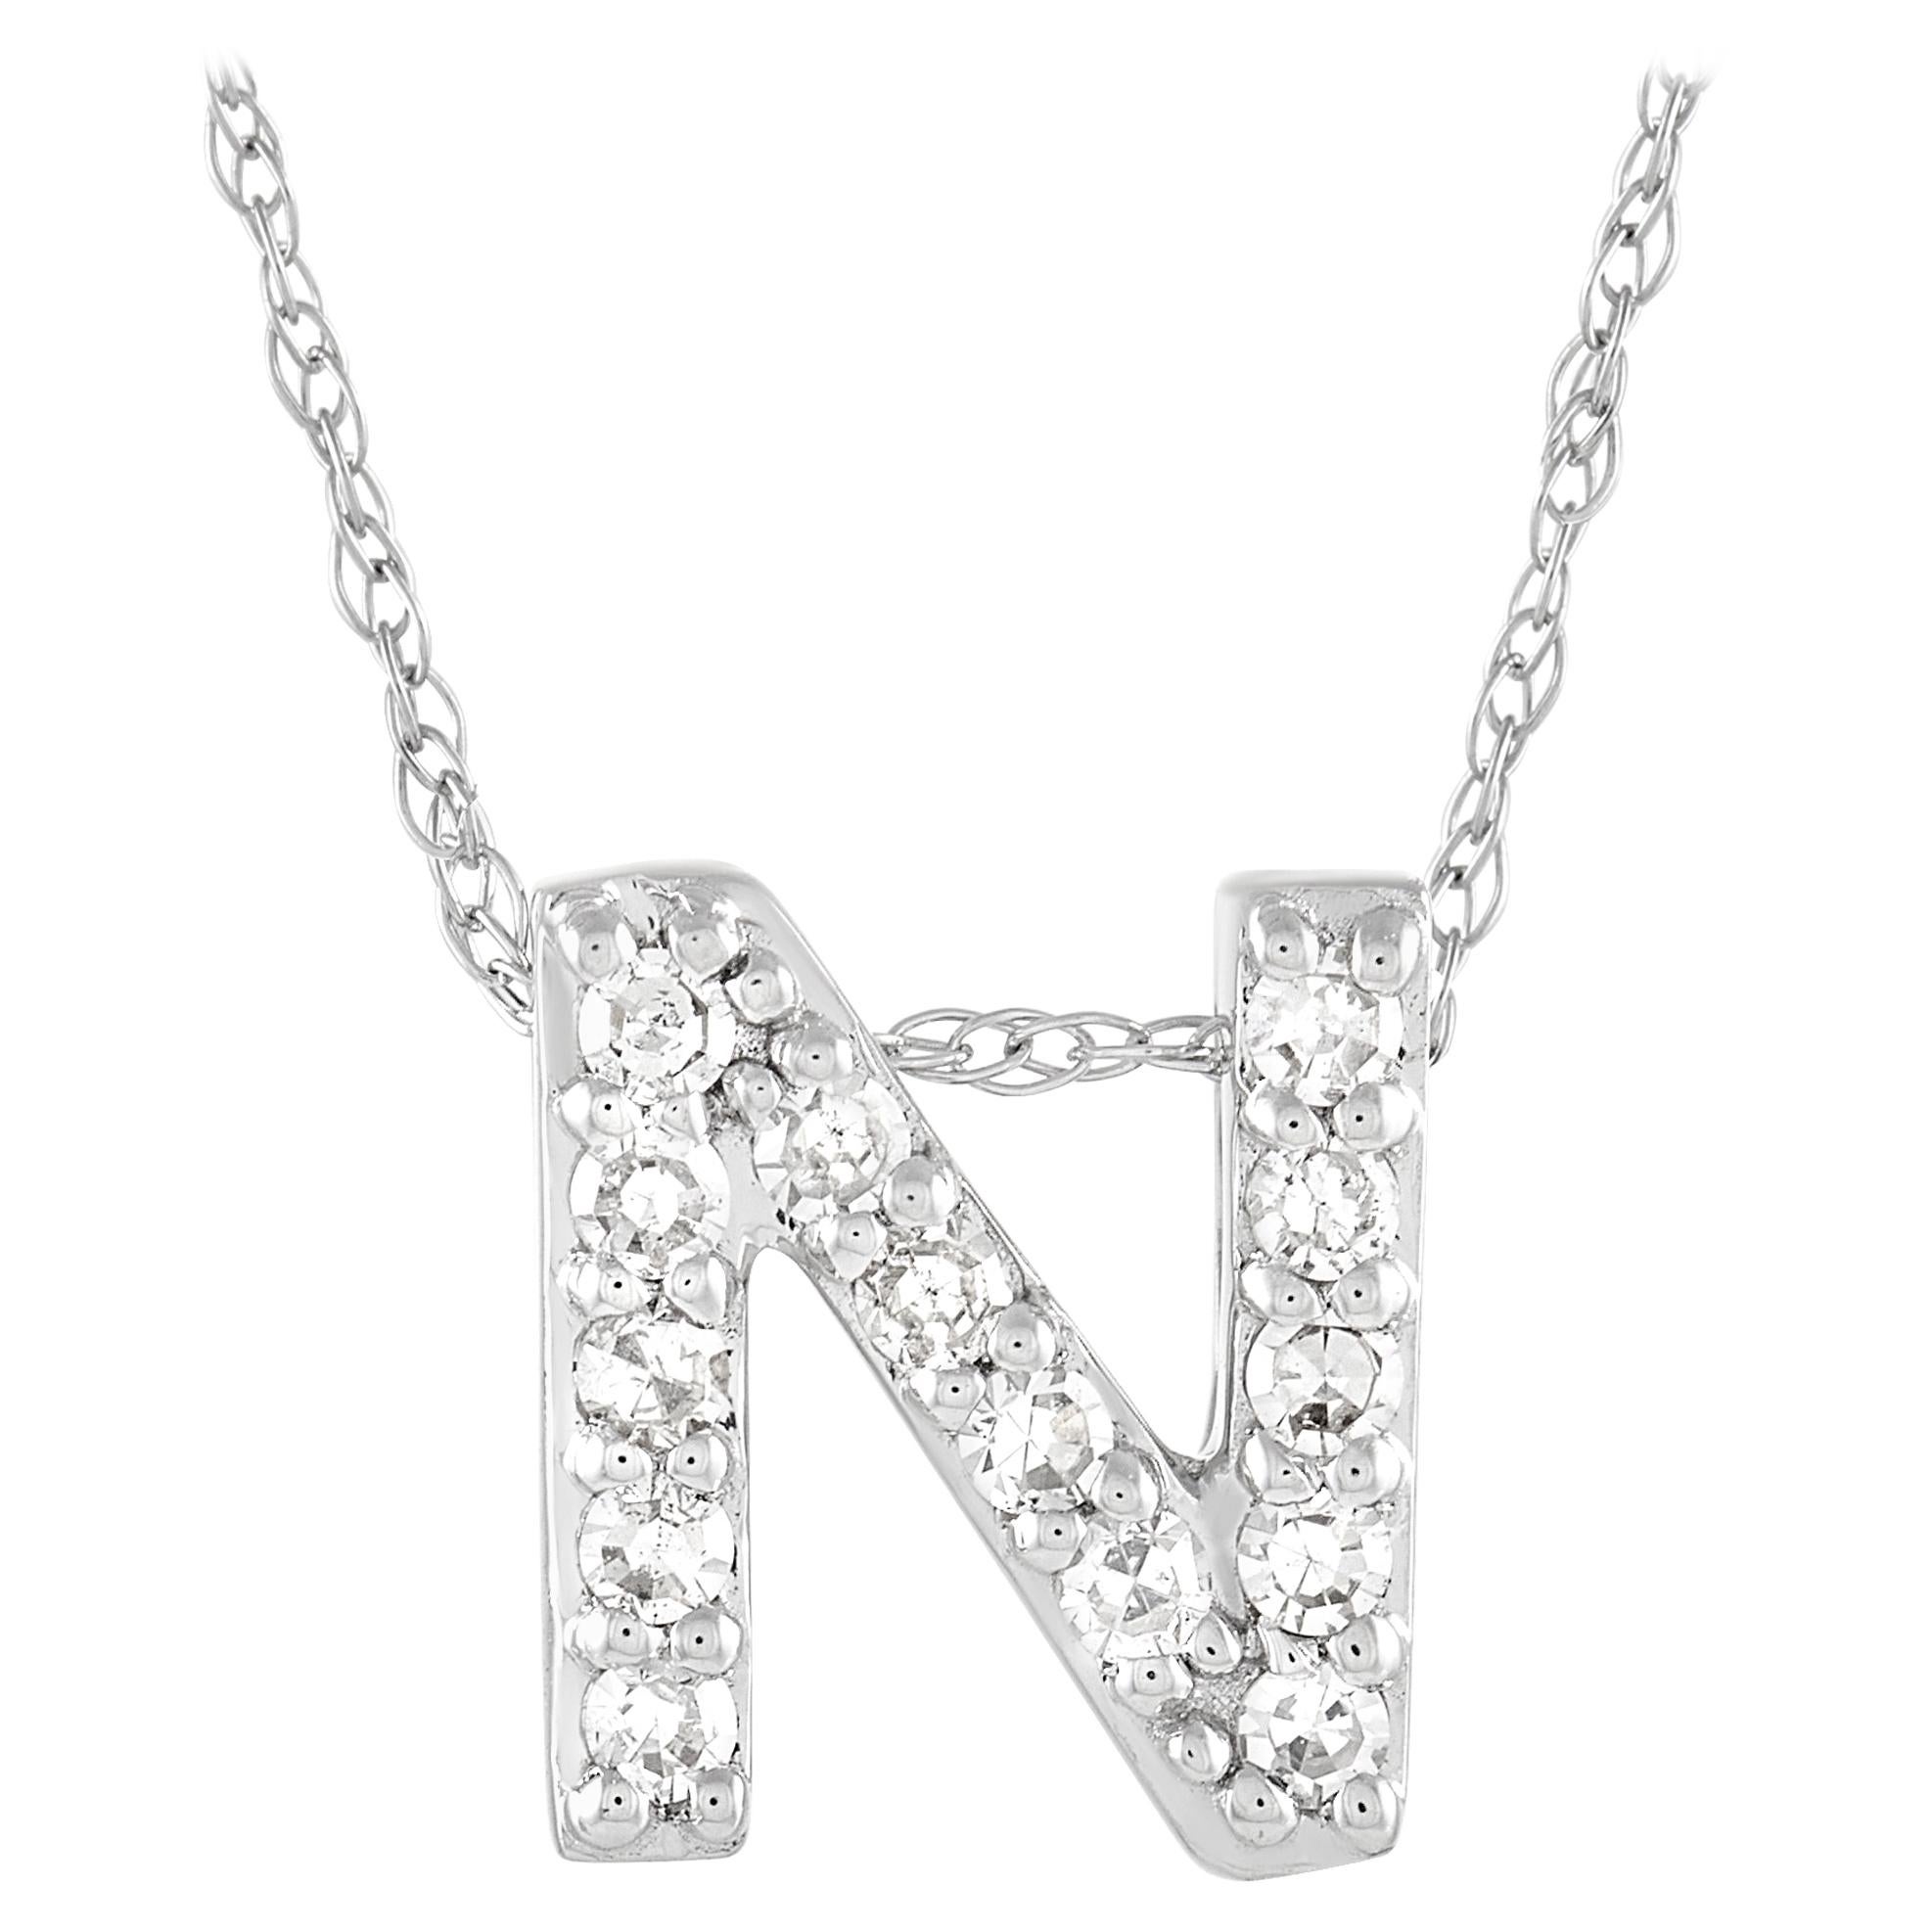 LB Exclusive 14K White Gold 0.10 ct Diamond Initial ‘N’ Necklace